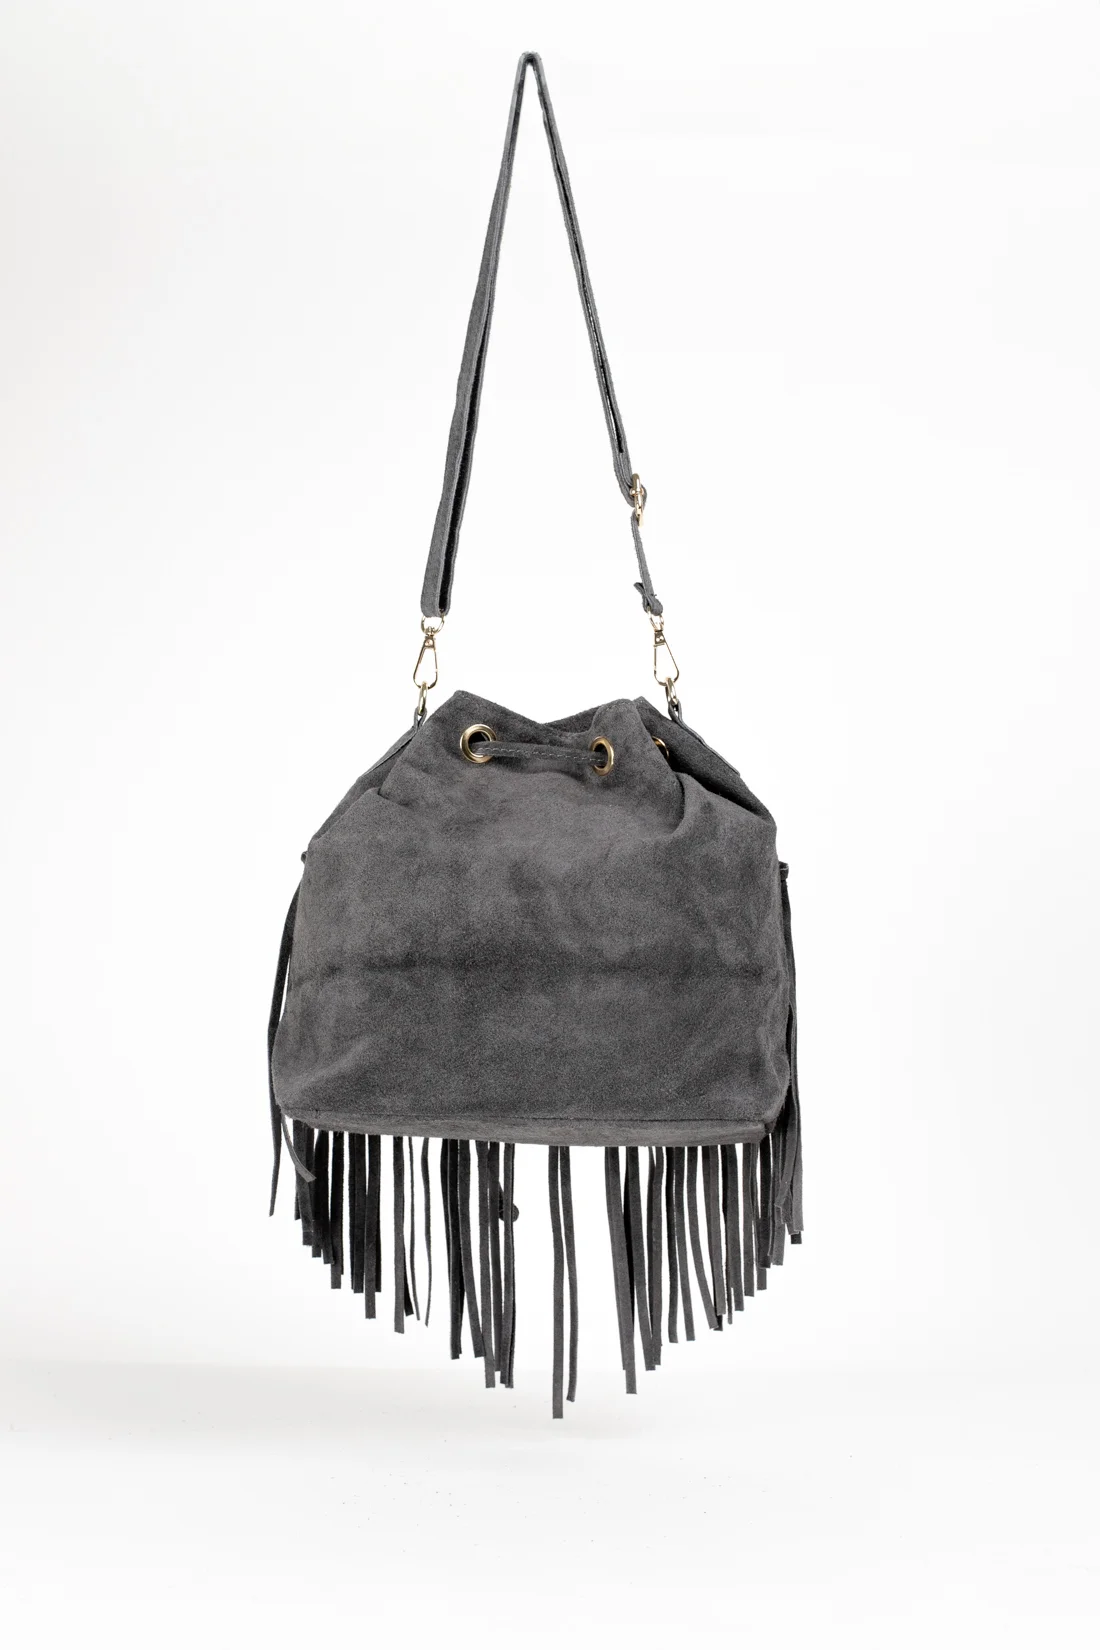 MAUMERE LEATHER BAG - GREY